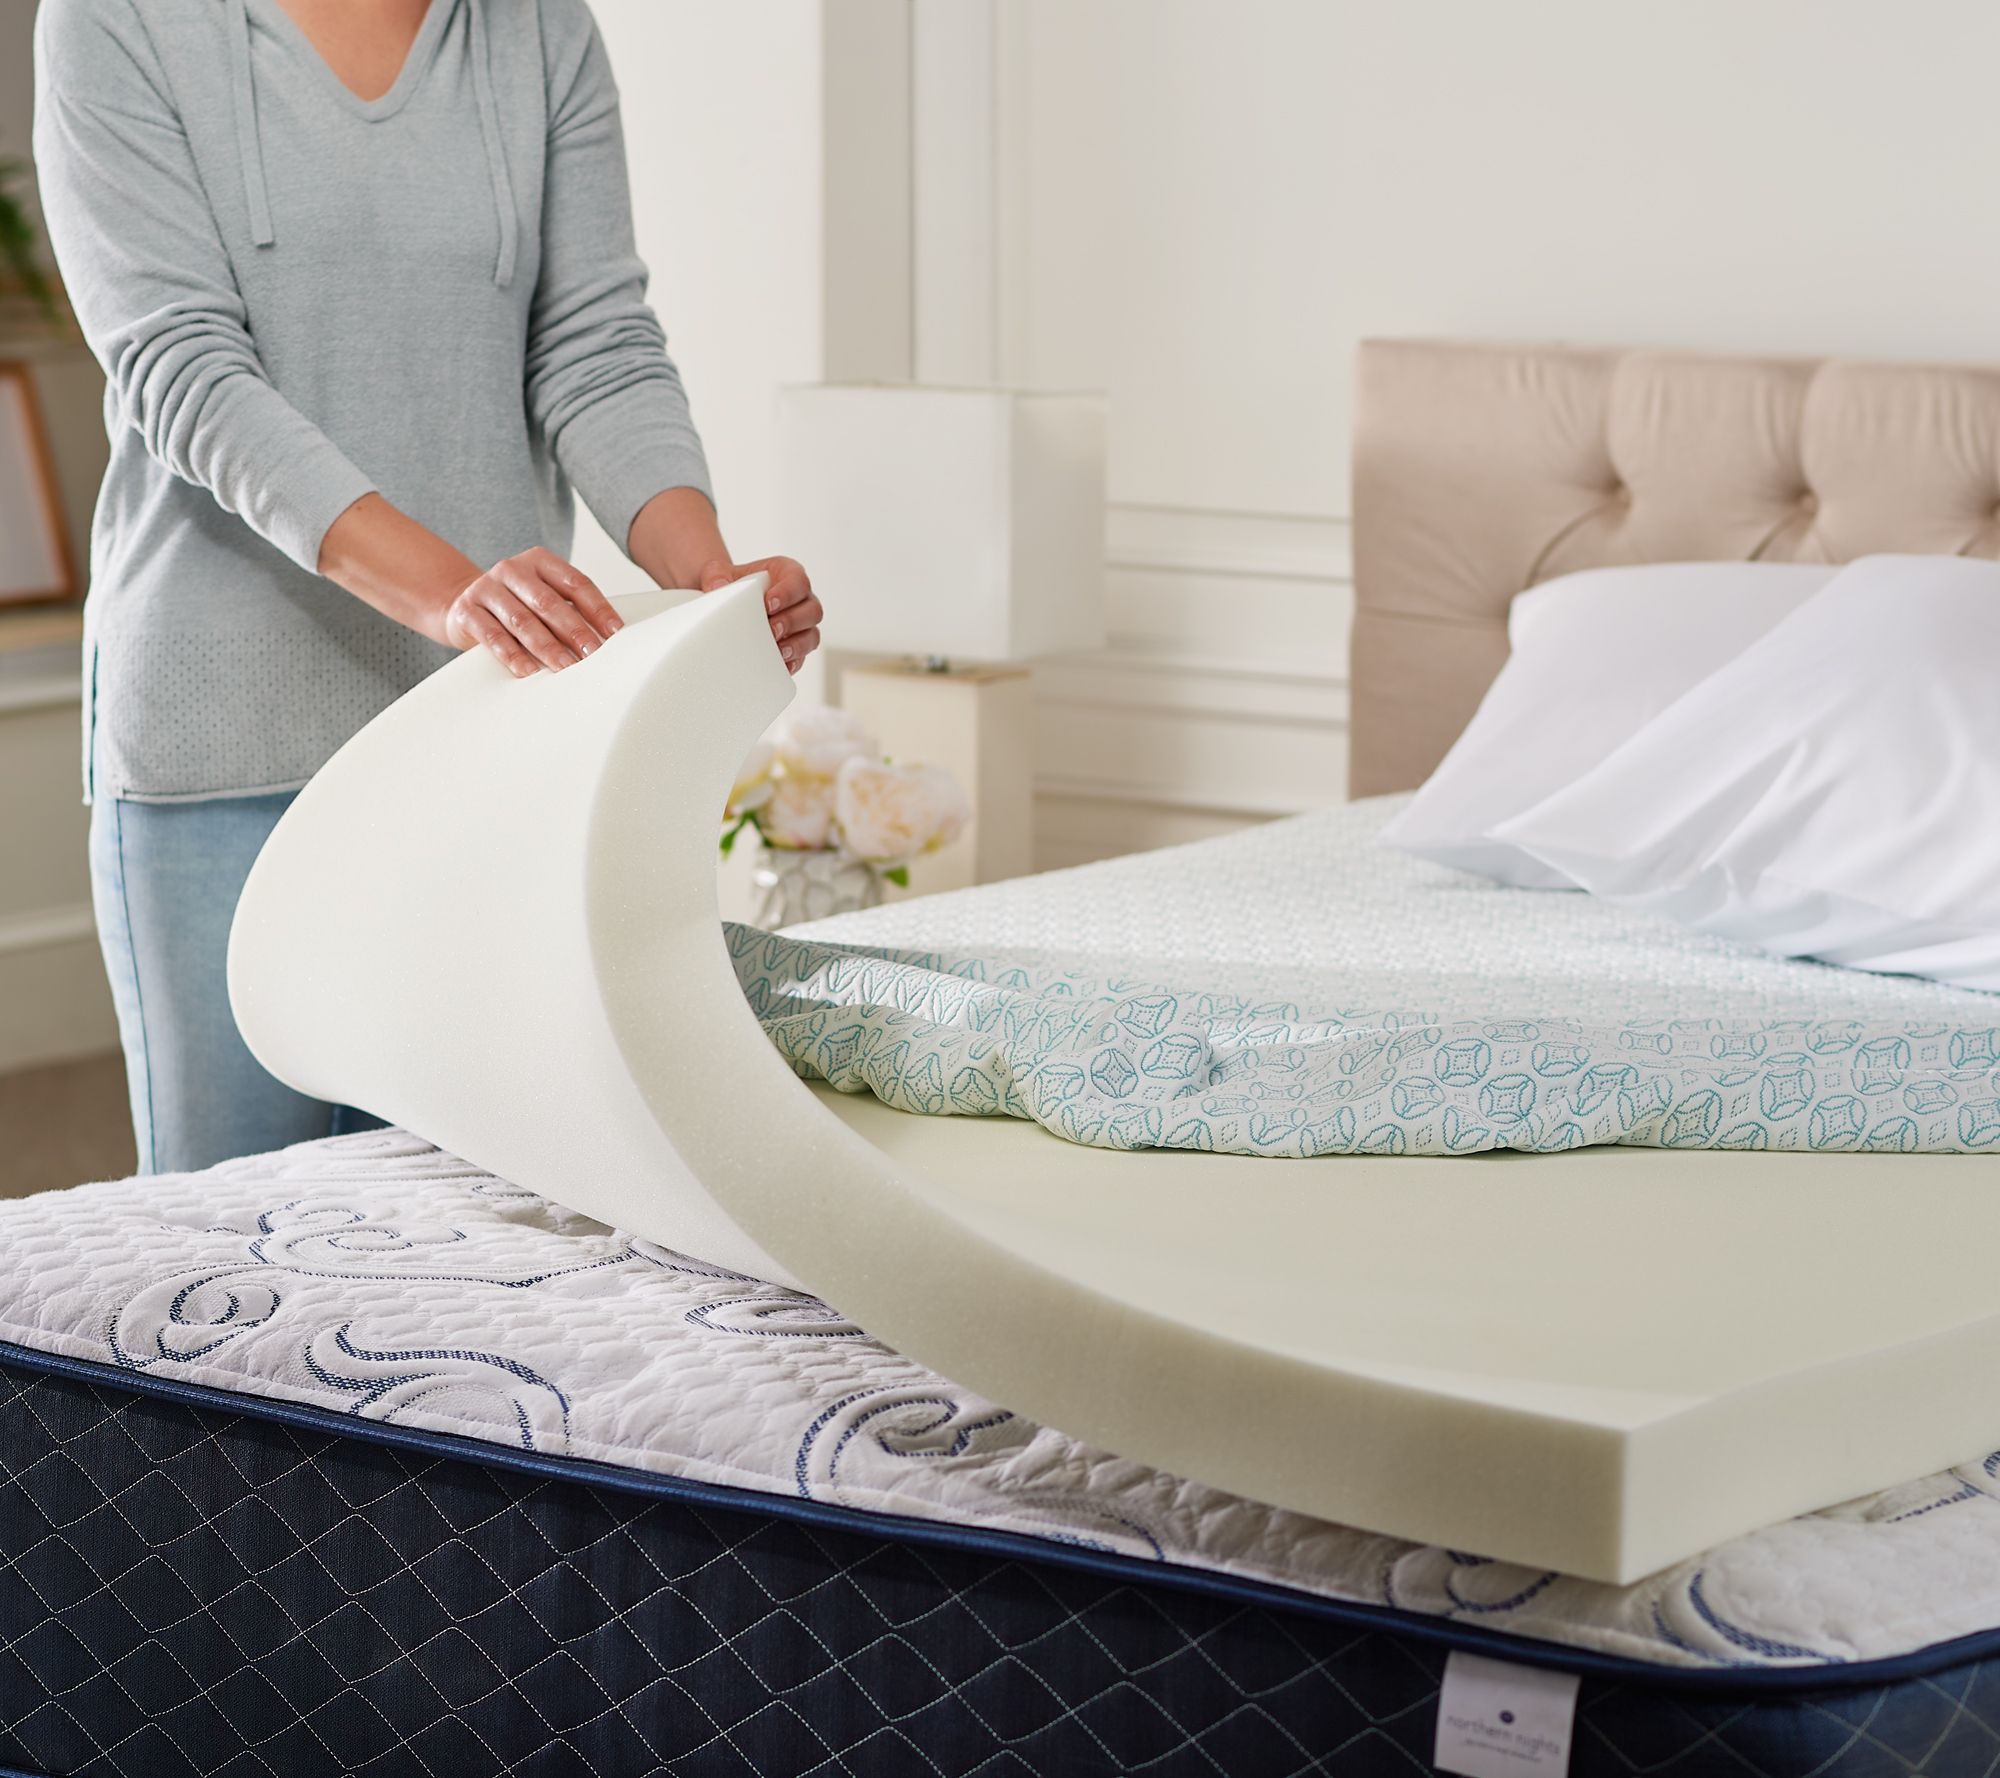 Official Website for Tempur-Pedic Toppers